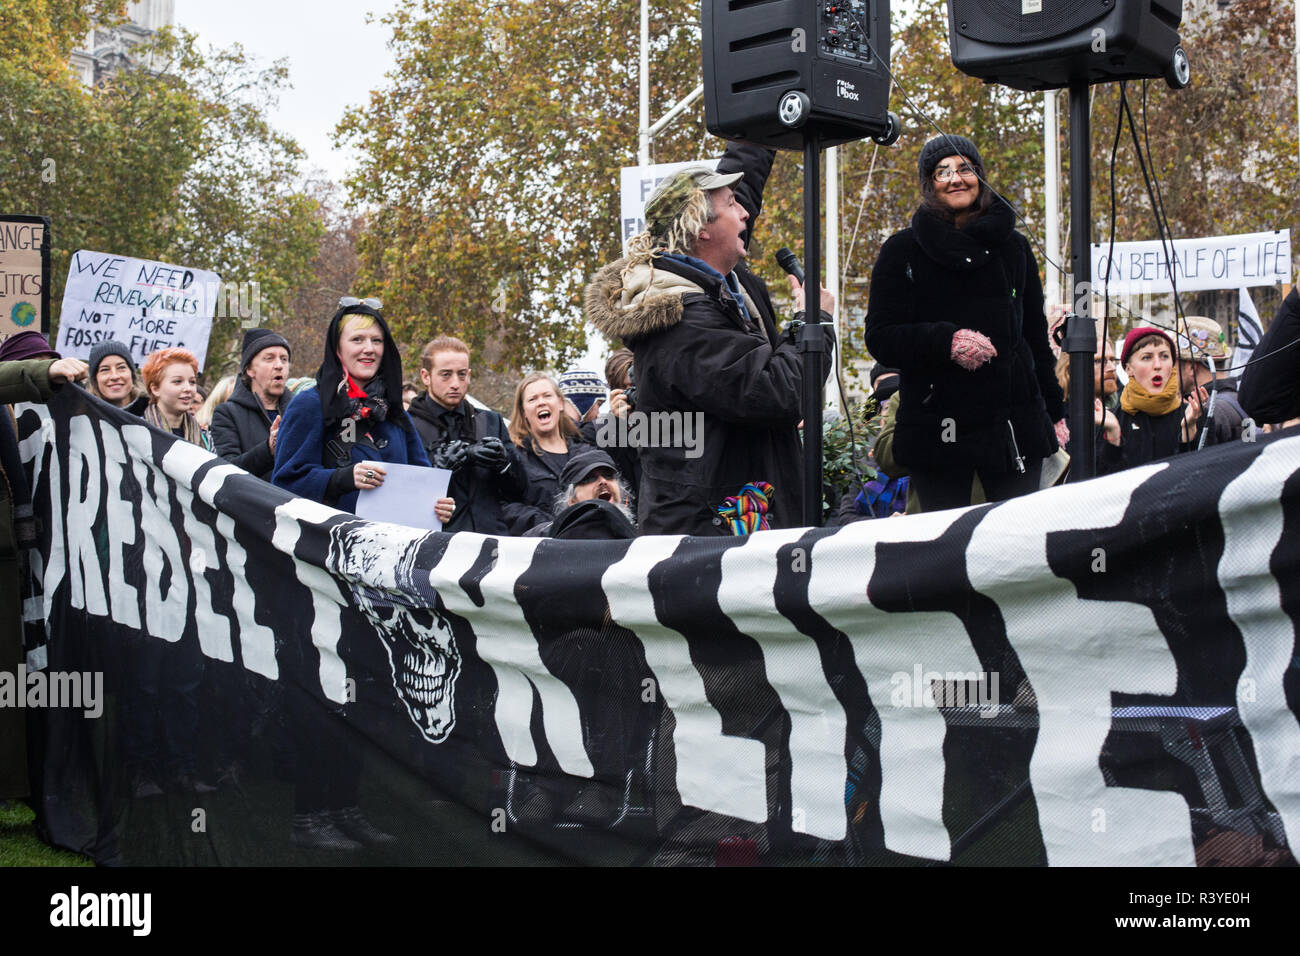 London, UK. 24th November, 2018. Environmental campaigners from Extinction Rebellion attend a Rebellion Day 2 event to highlight 'criminal inaction in the face of climate change catastrophe and ecological collapse' by the UK Government as part of a programme of civil disobedience during which scores of campaigners have been arrested. The event comprised a funeral ceremony in Parliament Square followed by a procession to Downing Street and Buckingham Palace. Credit: Mark Kerrison/Alamy Live News Stock Photo